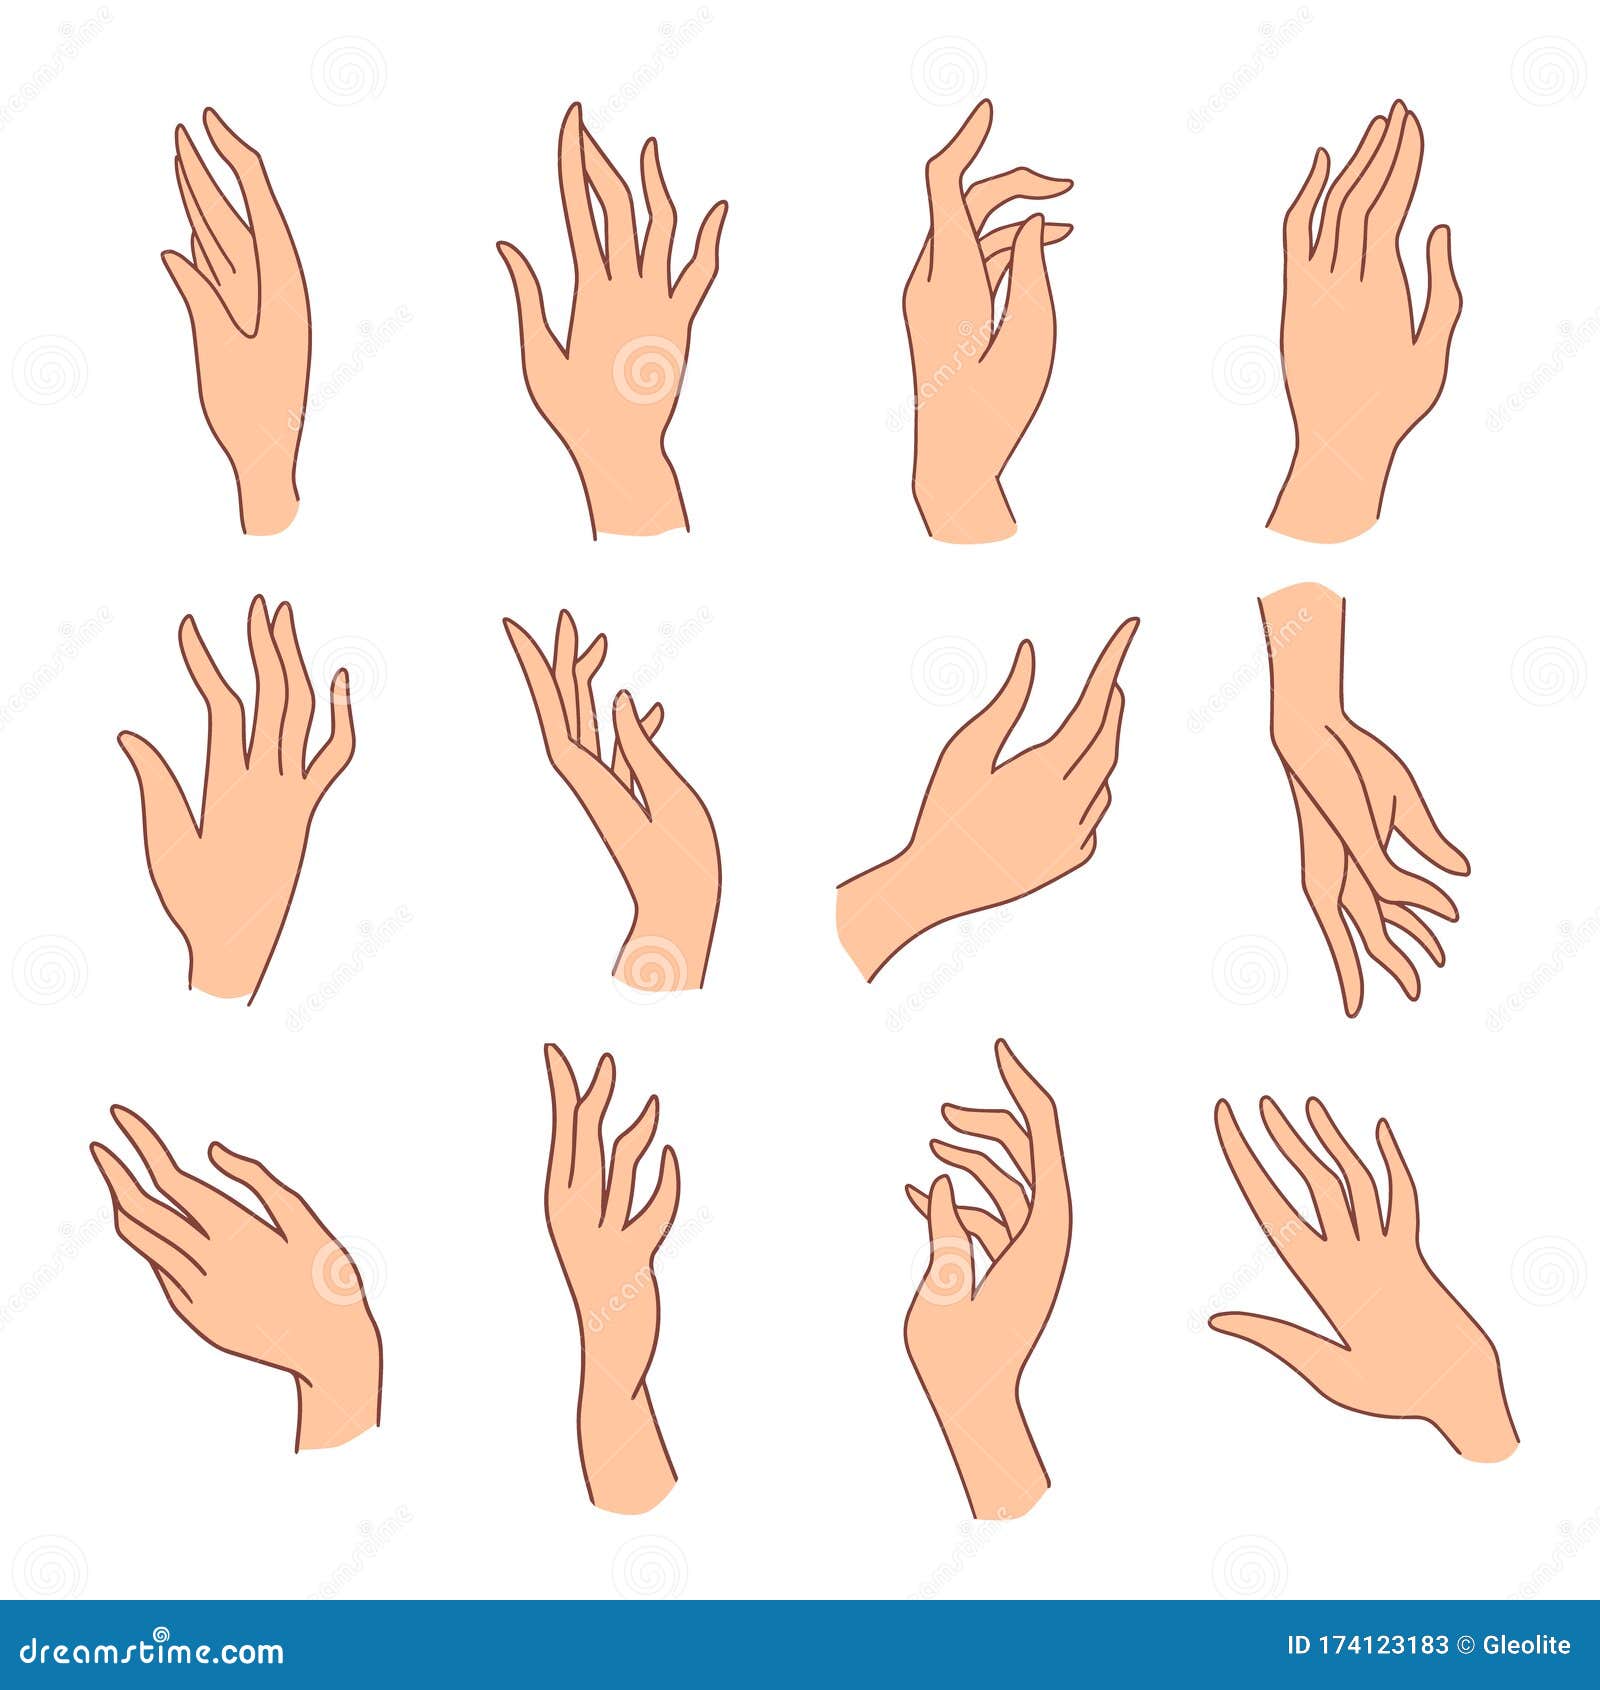 Set Of Minimalistic Colored Female Hands Art Drawings Symbols Or Signs Stock Vector Illustration Of Contour Holding